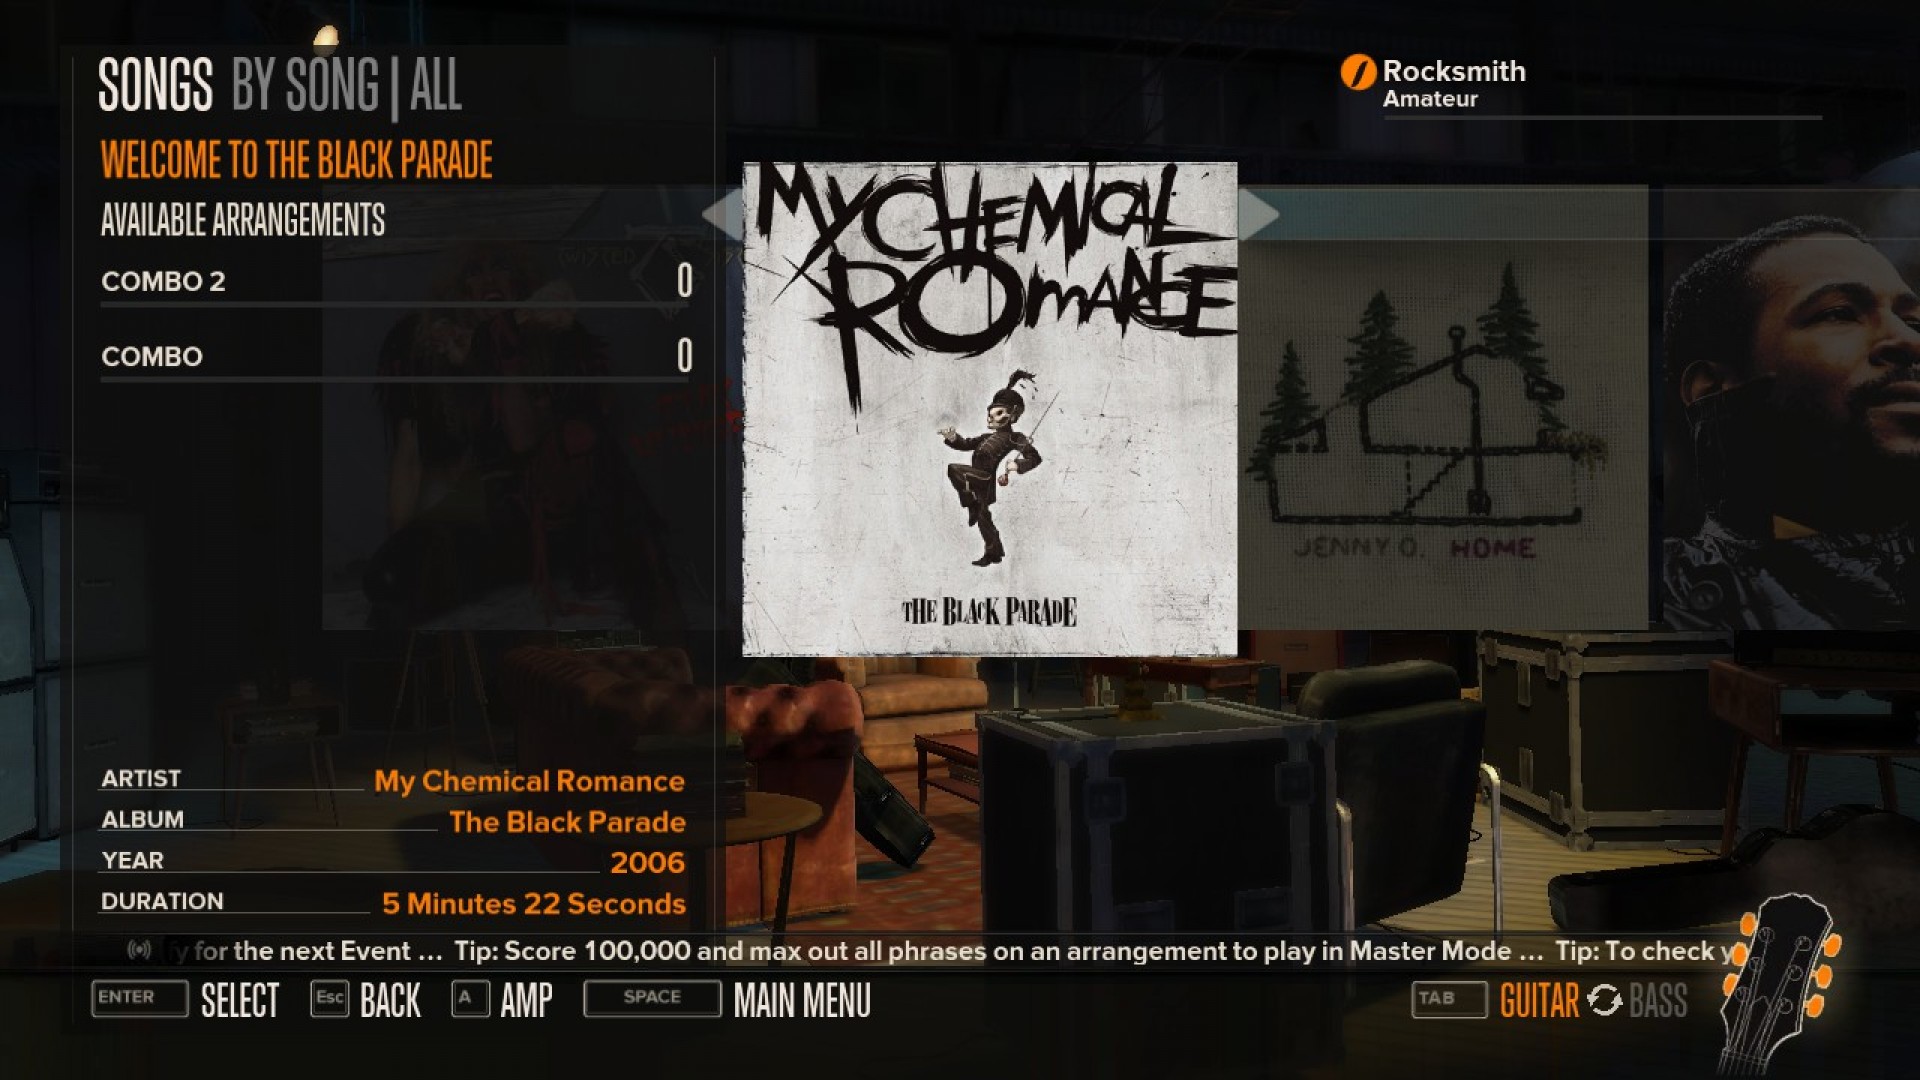 Rocksmith - My Chemical Romance - Welcome to the Black Parade screenshot